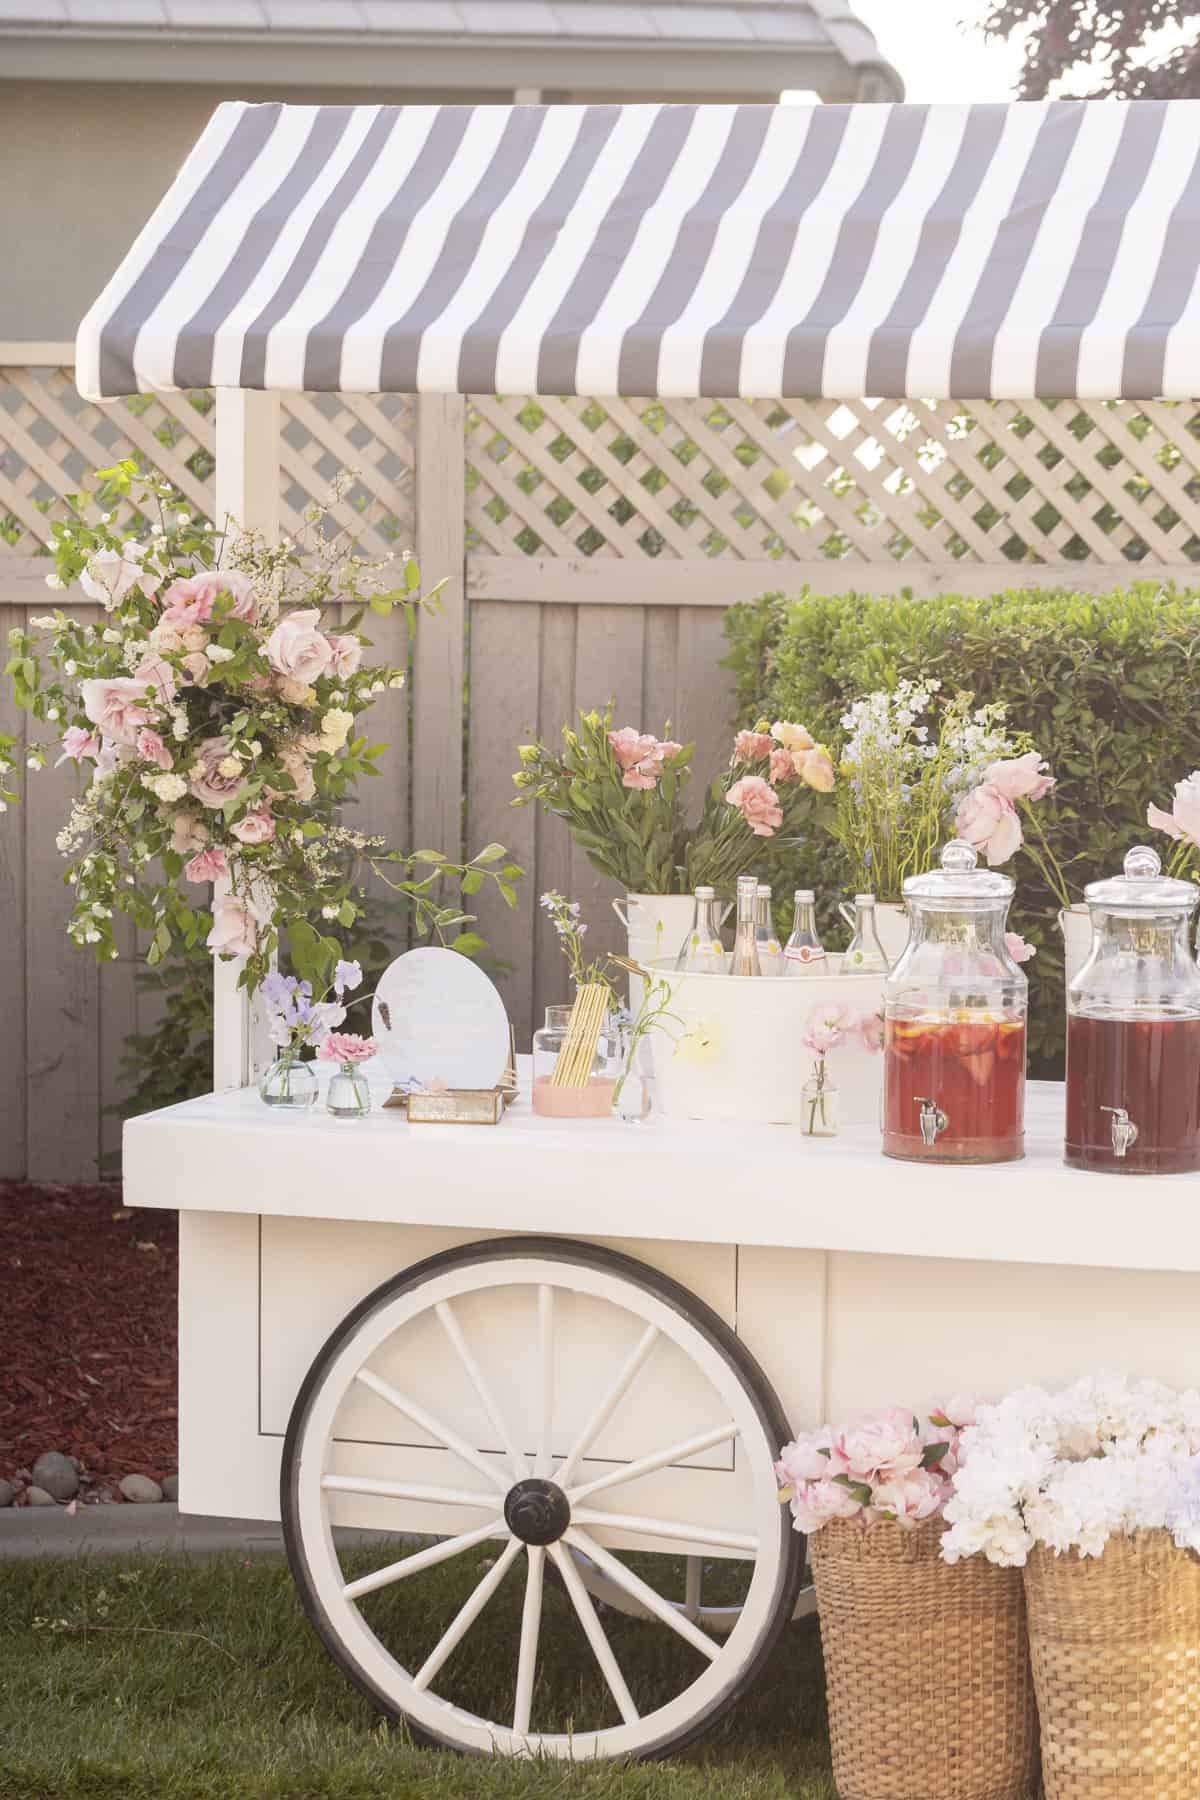 white cart with big wheel and flowers on it holding drink despensers